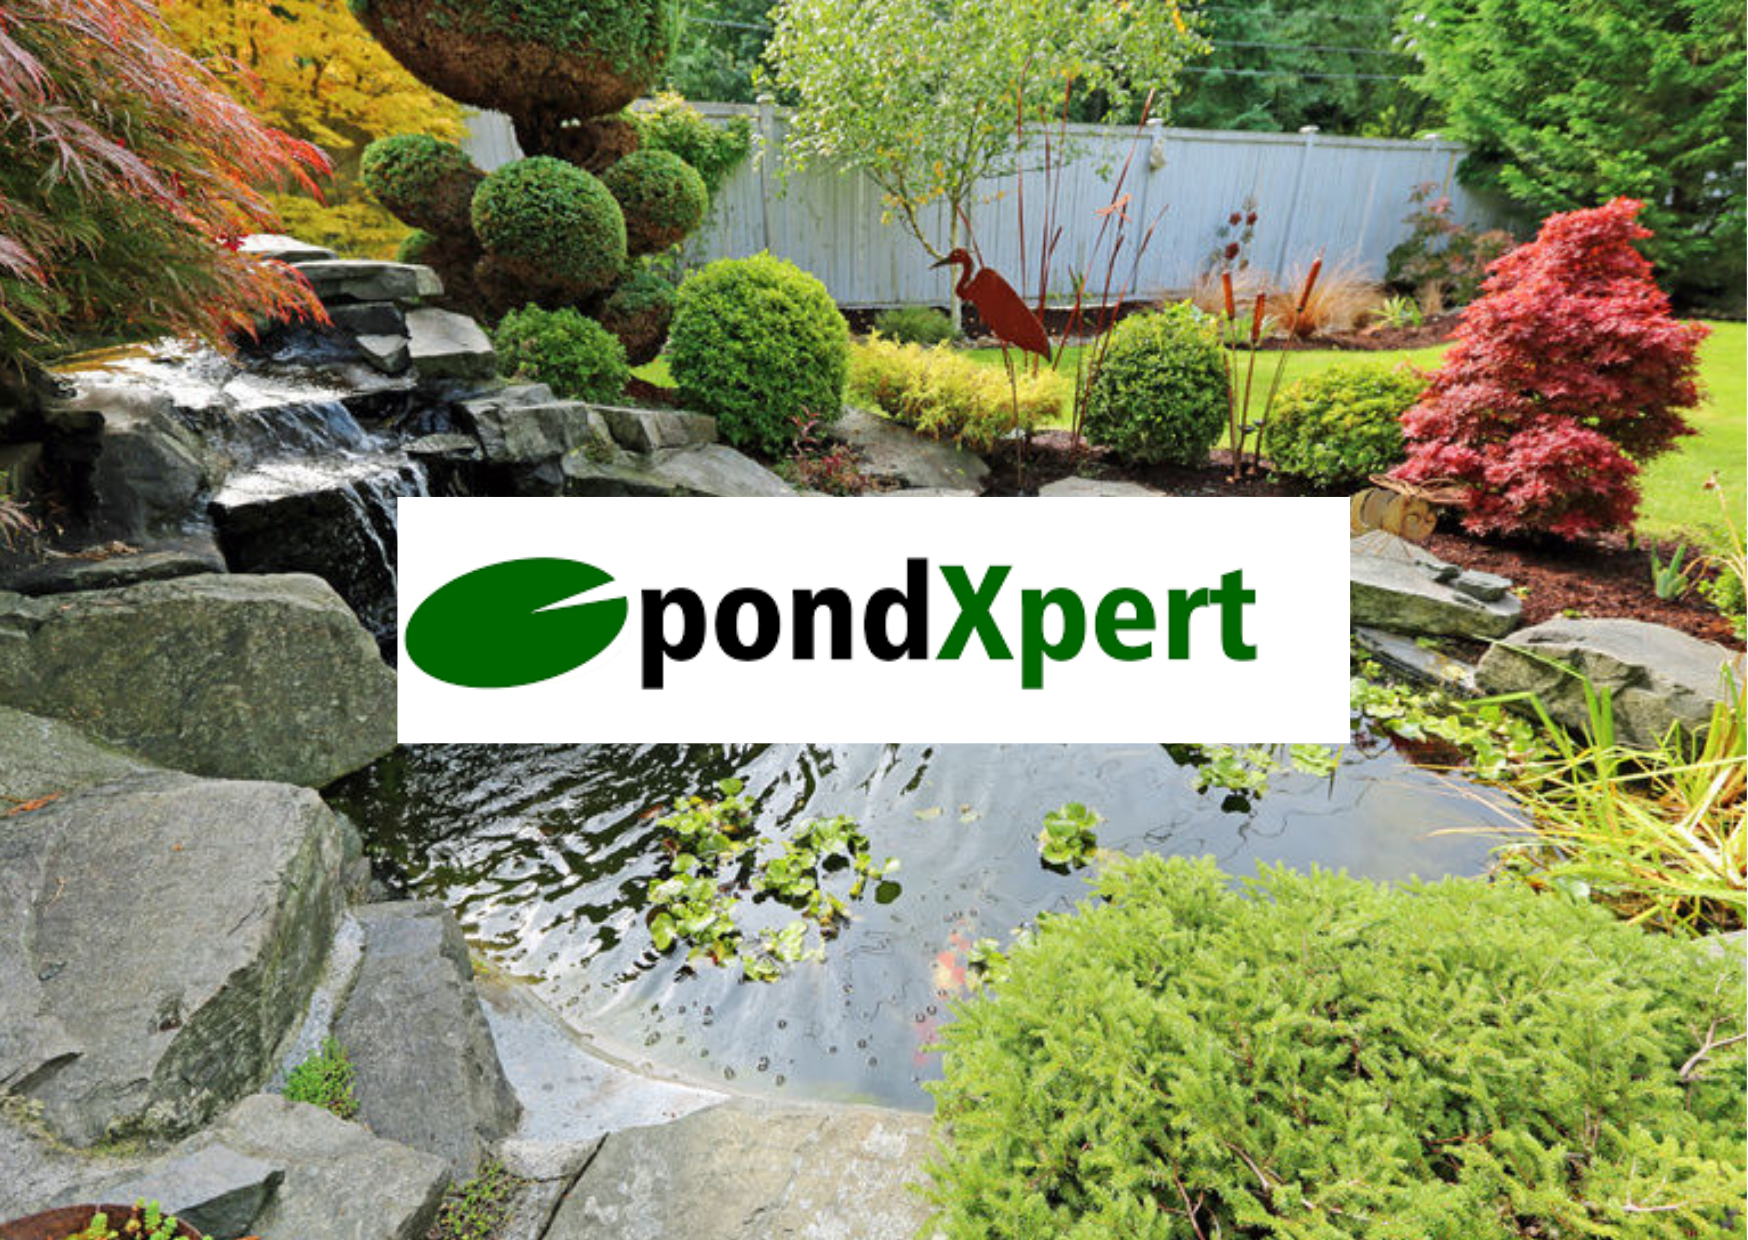 PondXpert Guide | How To Build A Pond In A Weekend